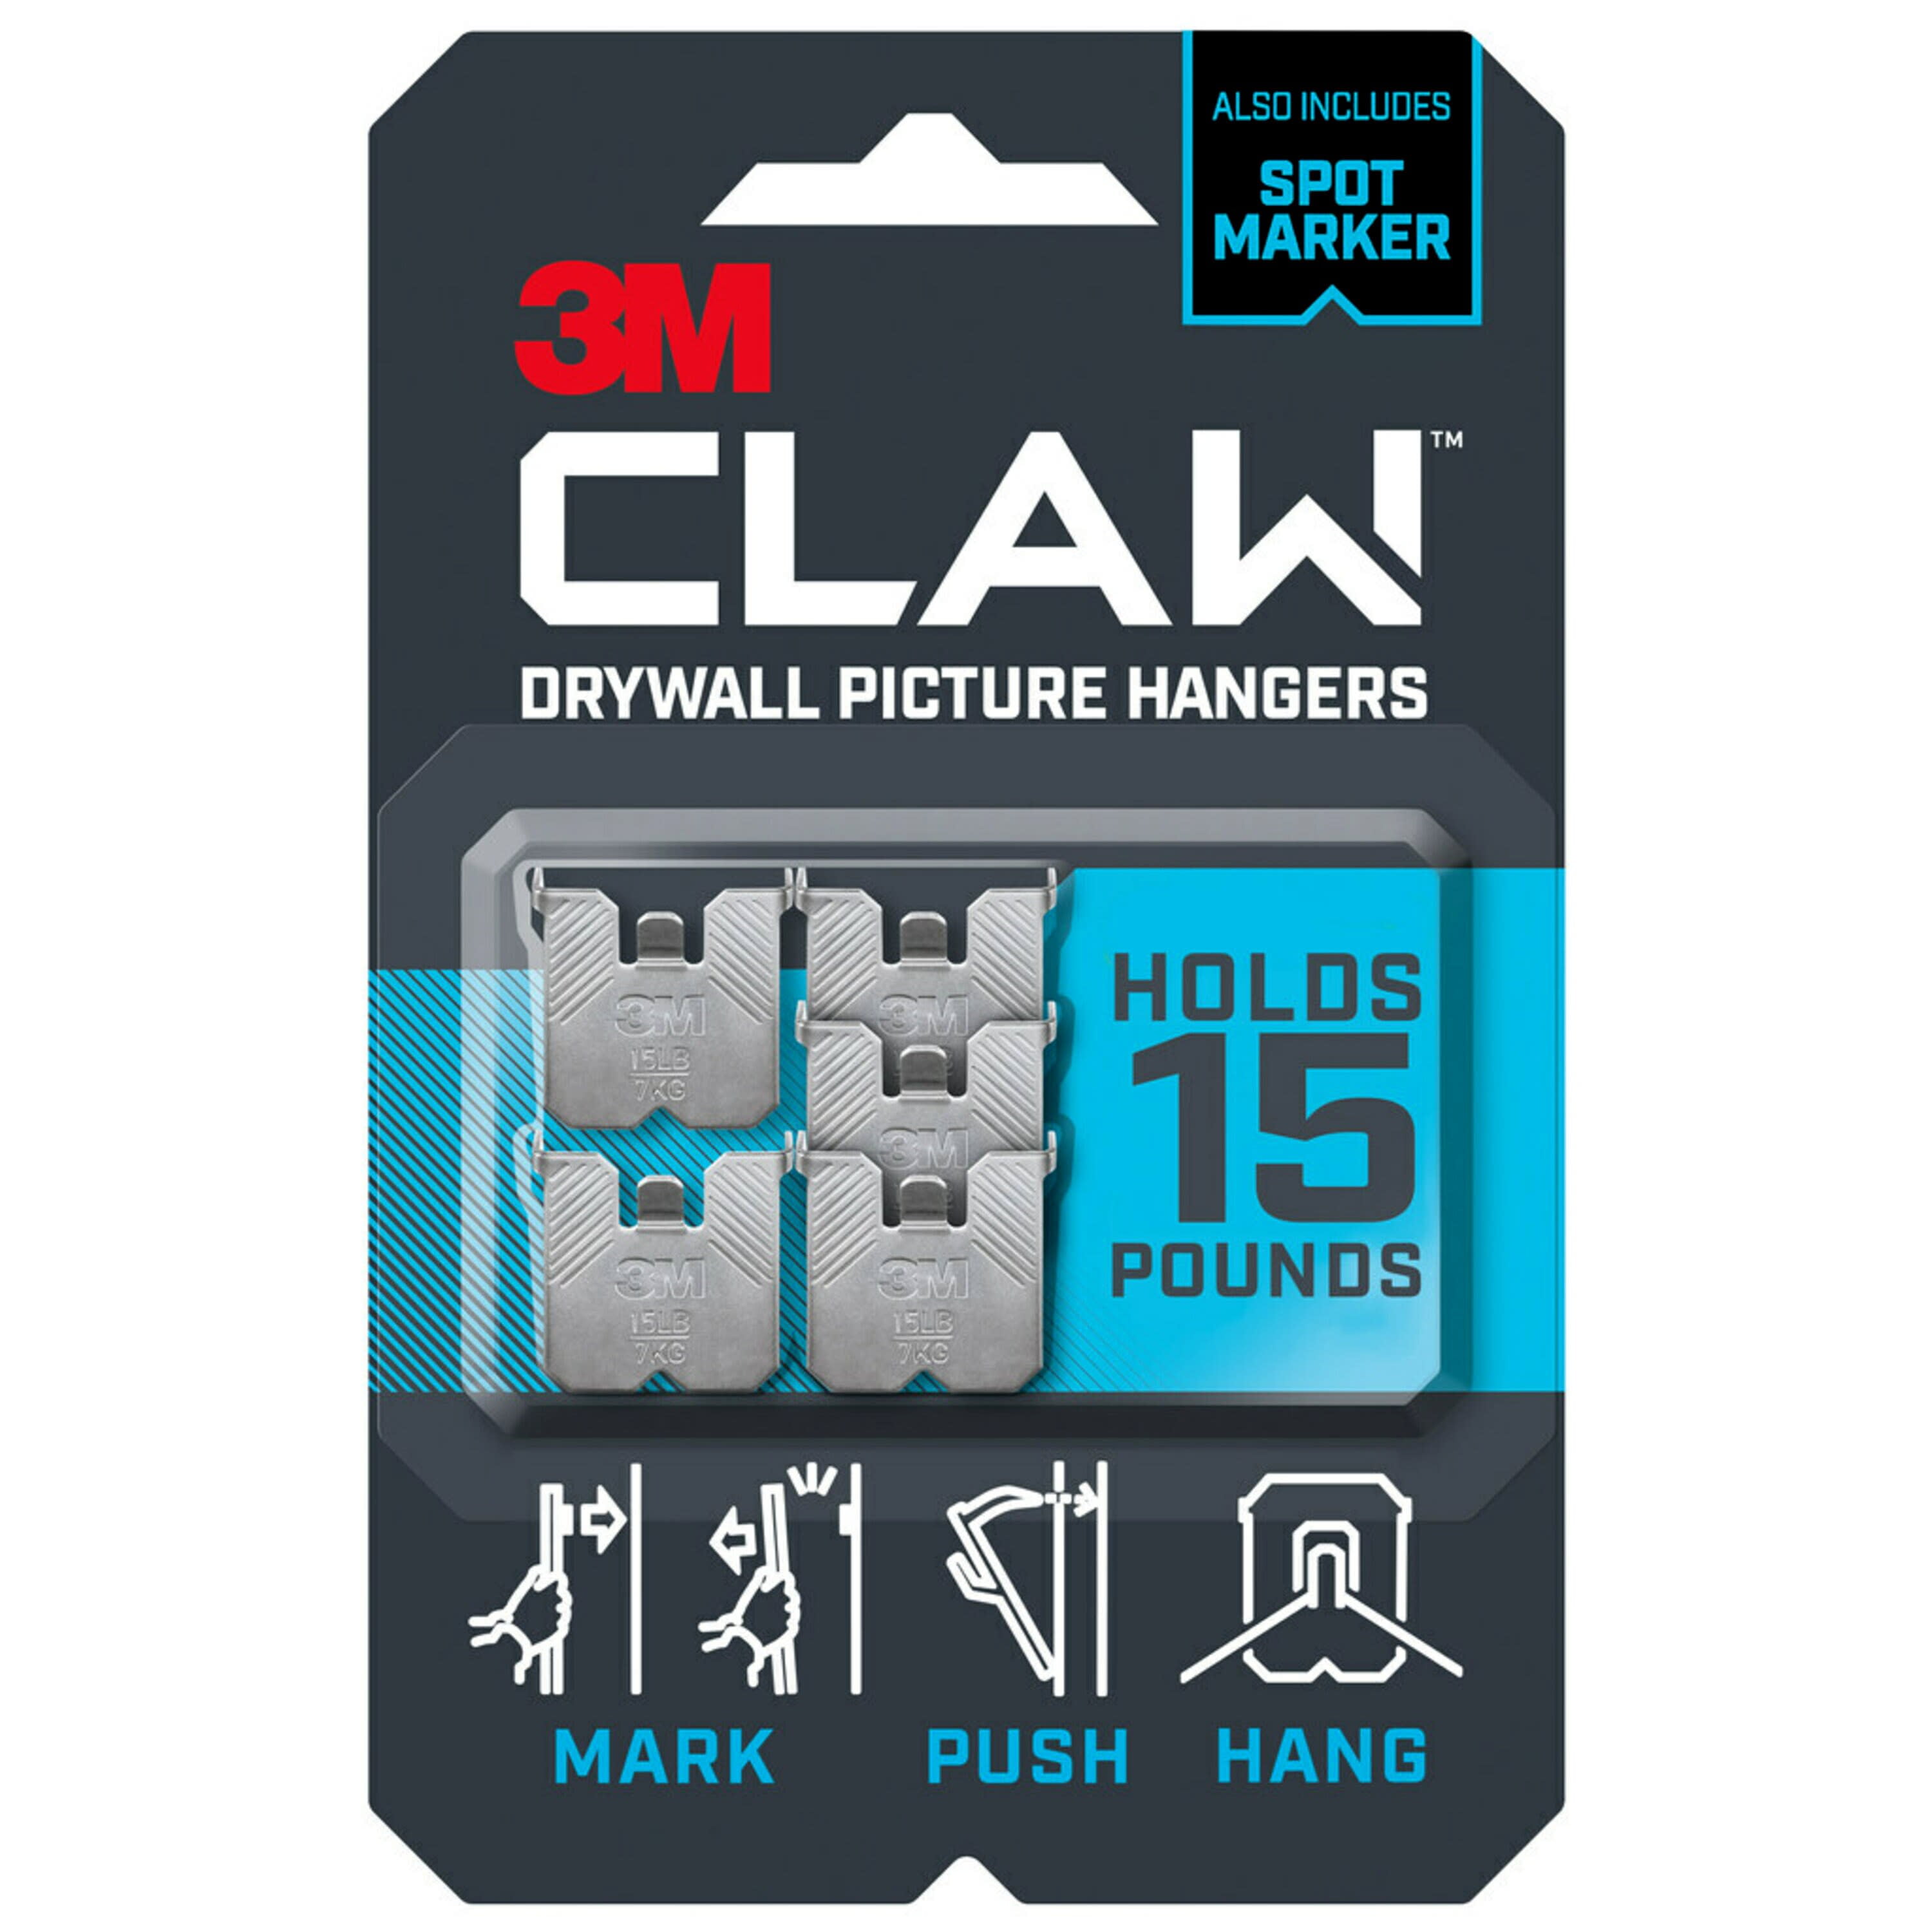 3M CLAW™ Drywall Picture Hanger with Temporary Spot Marker, holds